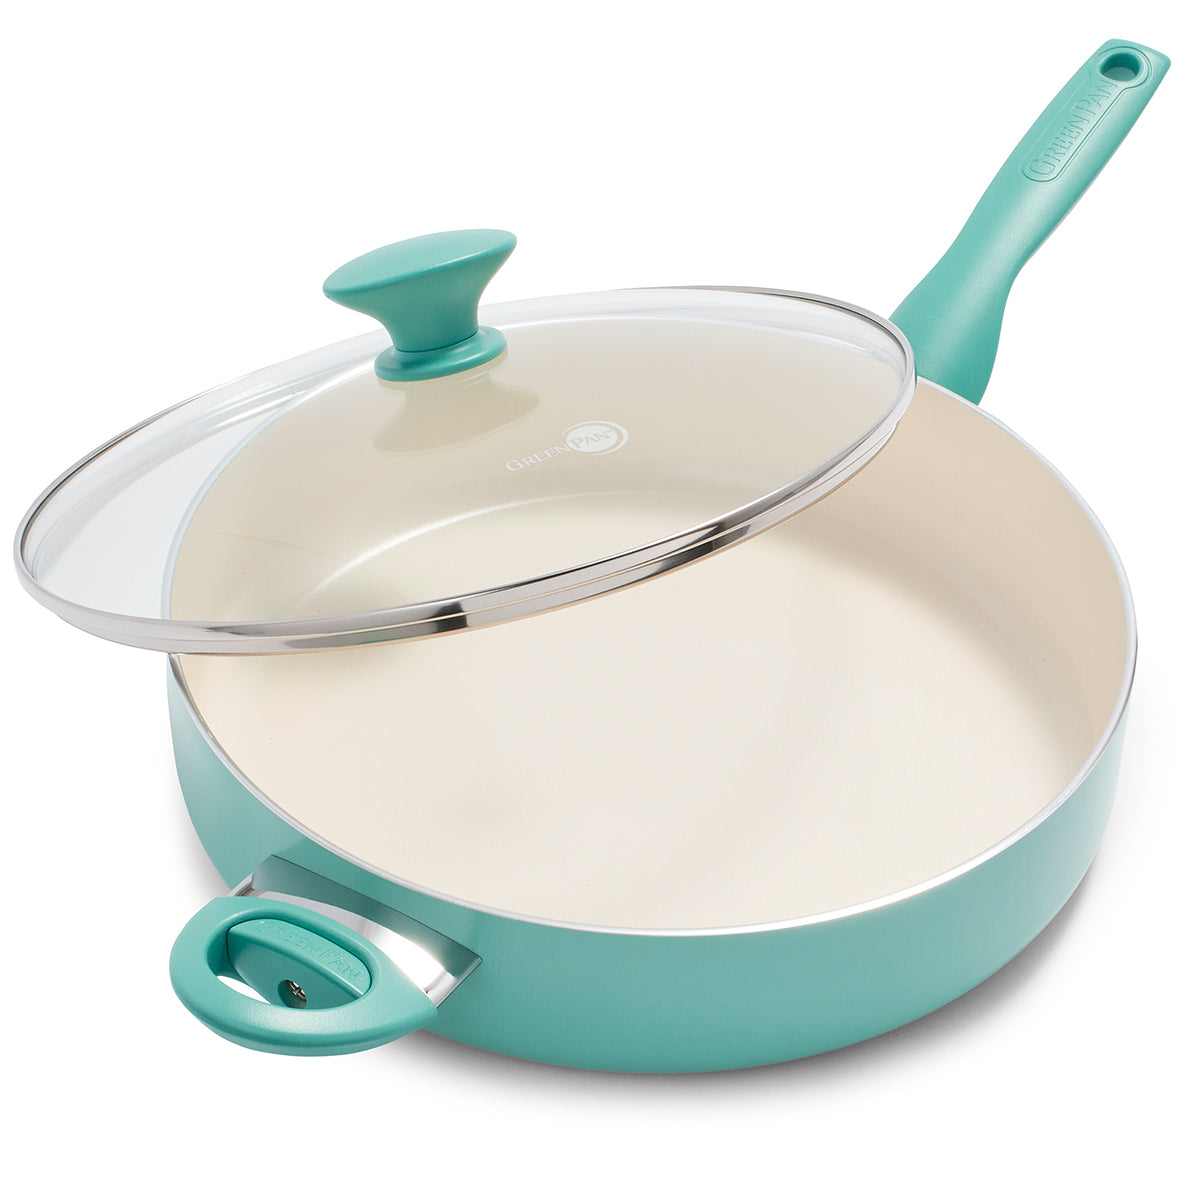 GreenLife vs. GreenPan Cookware: Which is Right for You?